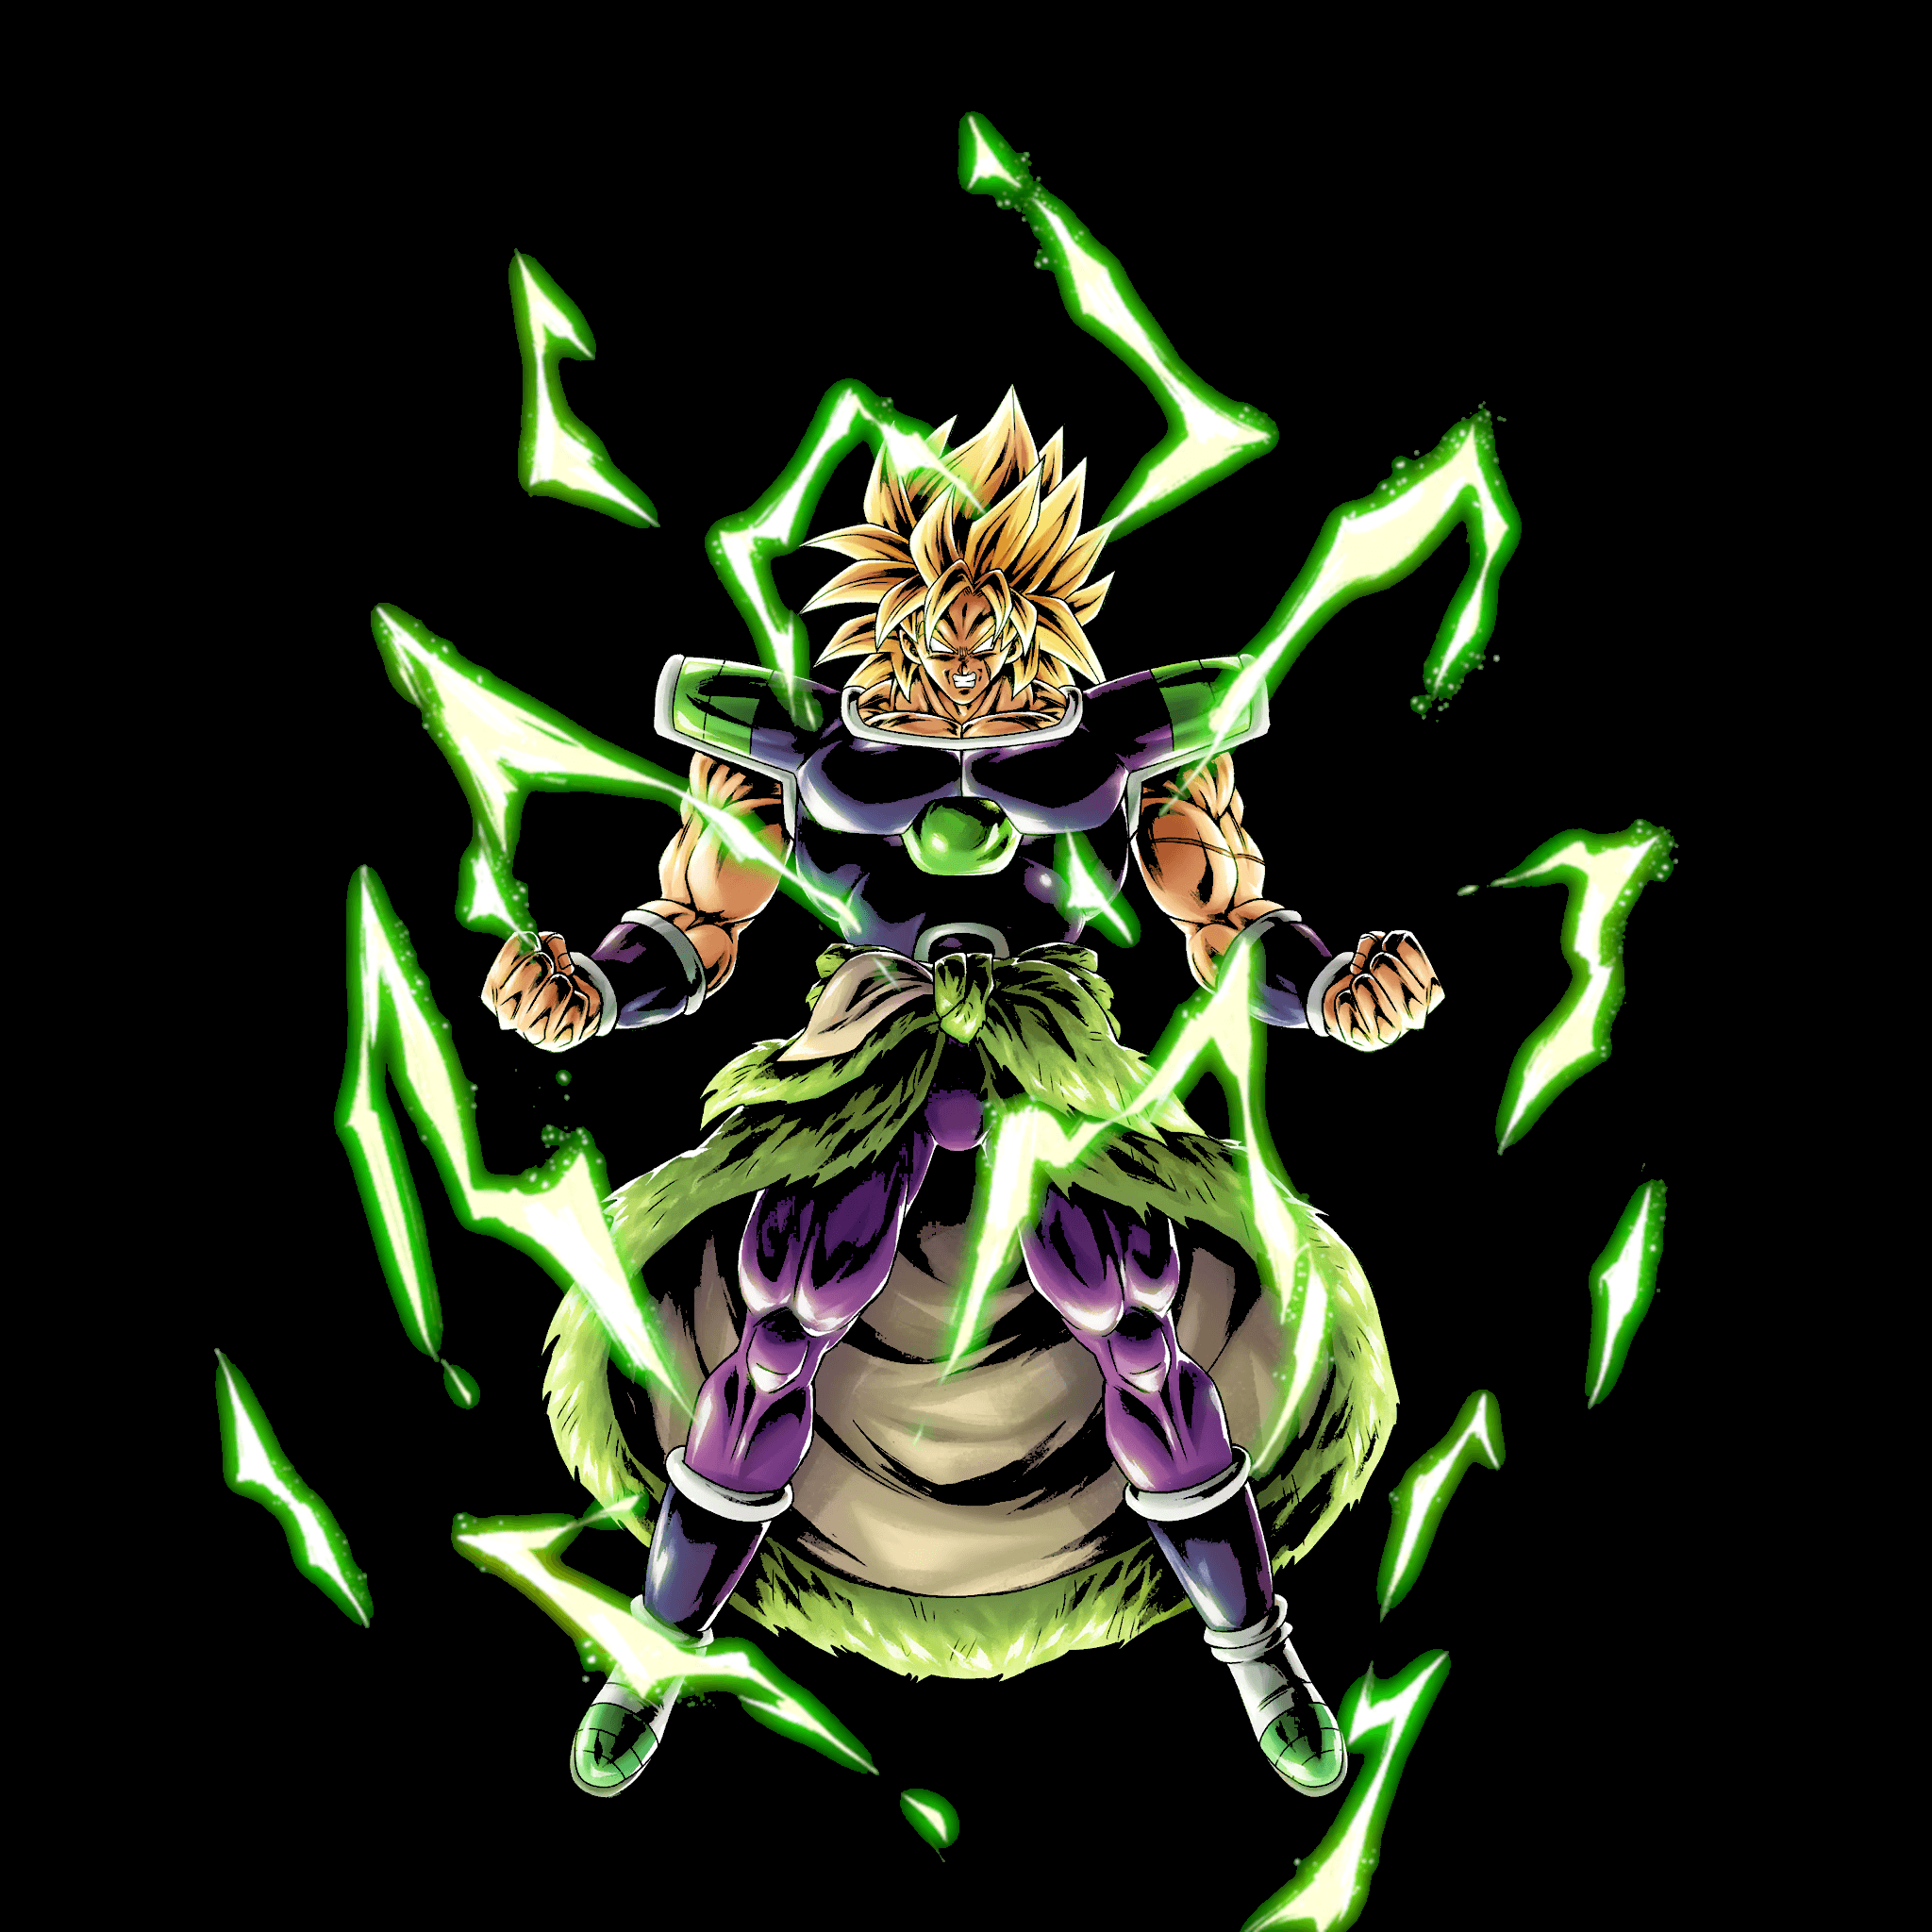 Broly Wallpaper for mobile phone tablet desktop computer and other  devices HD and 4K wal  Dragon ball artwork Dragon ball wallpapers  Dragon ball super artwork